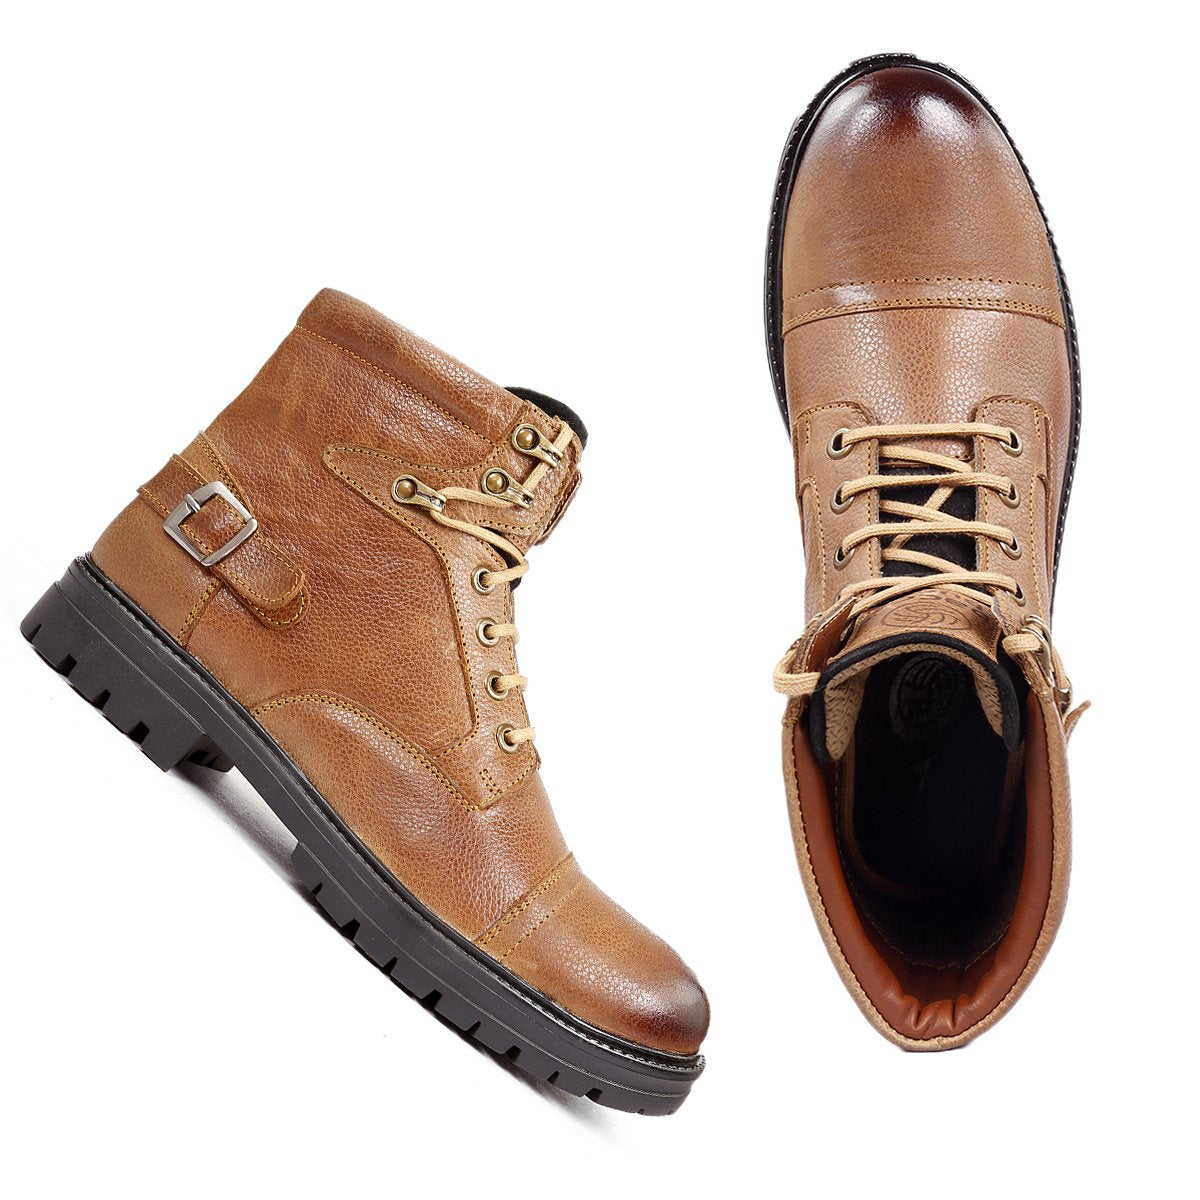 derby boots men, men chukka boots, genuine leather boots, tan leather boots 